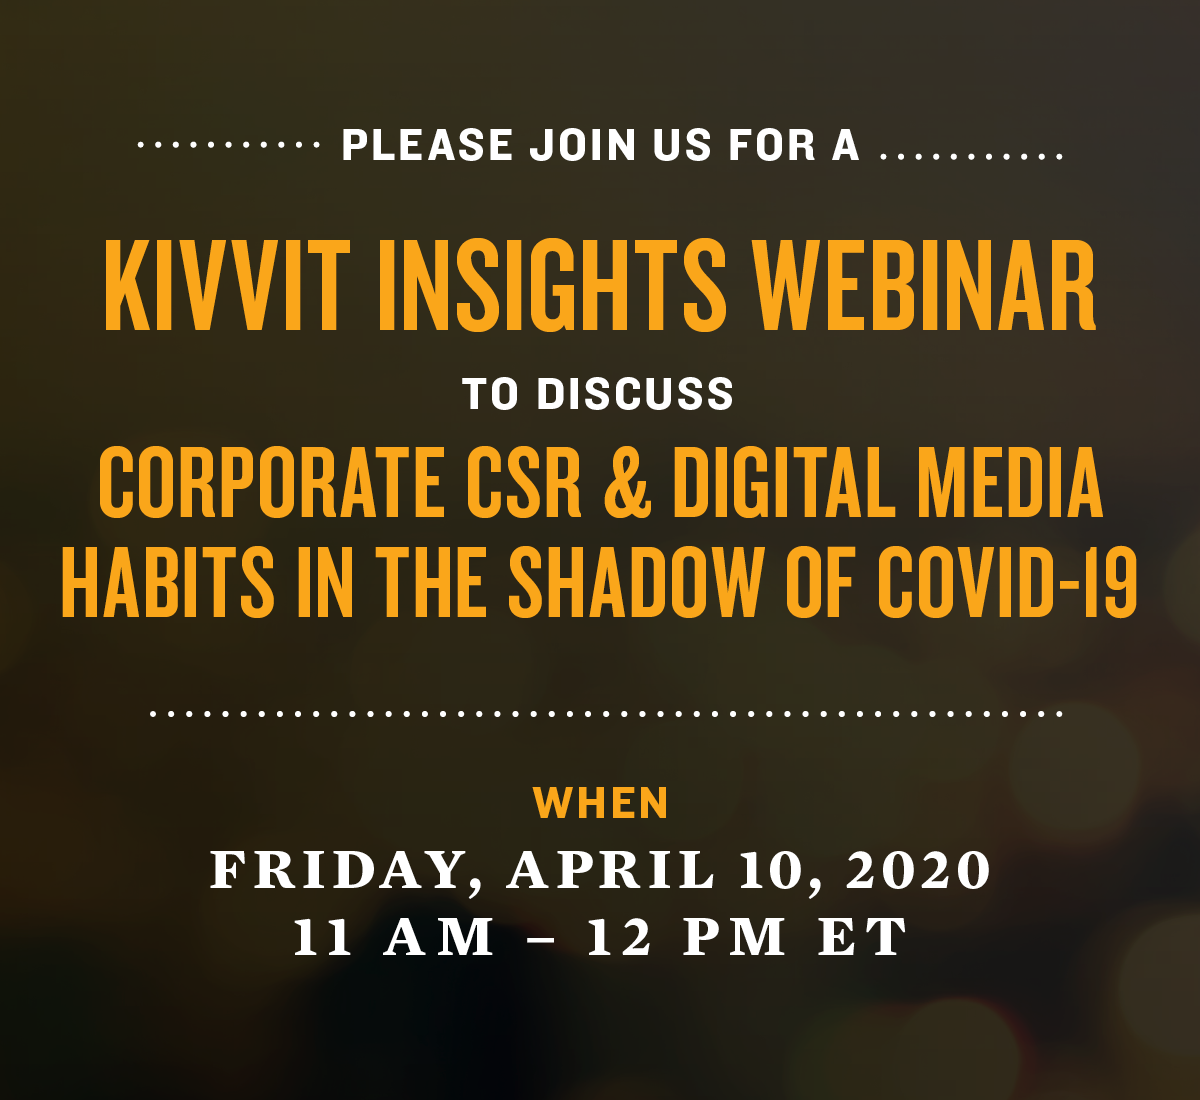 Graphic of Kivvit Webinar invite on corporate CSR and digital media habits in the shadow of COVID-19